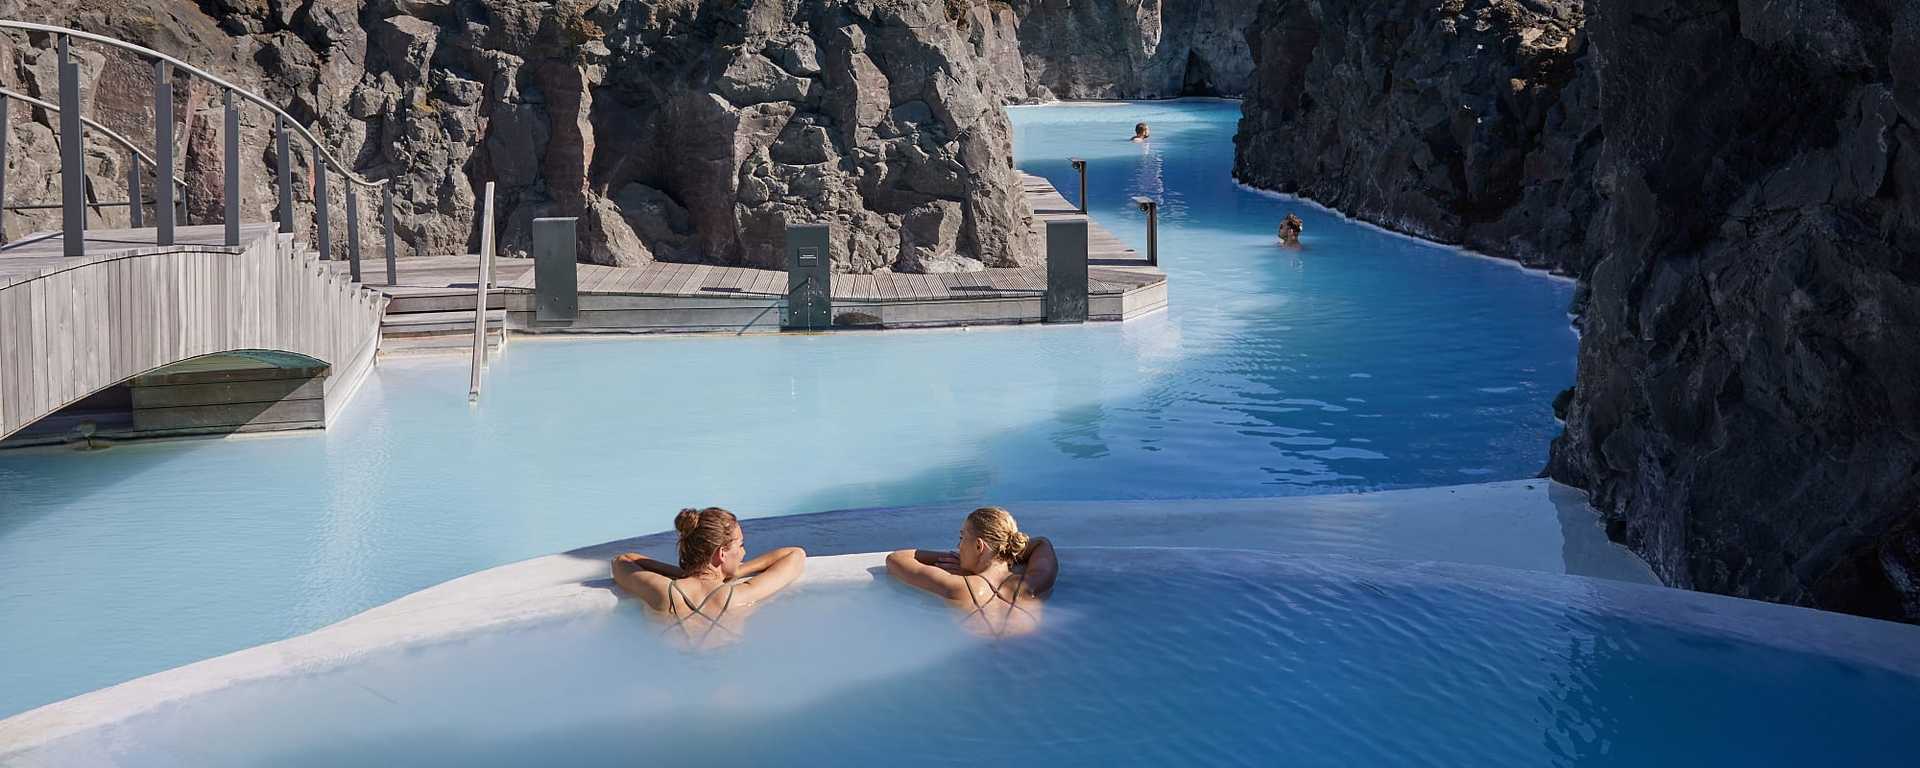 The Retreat at Blue Lagoon in Iceland